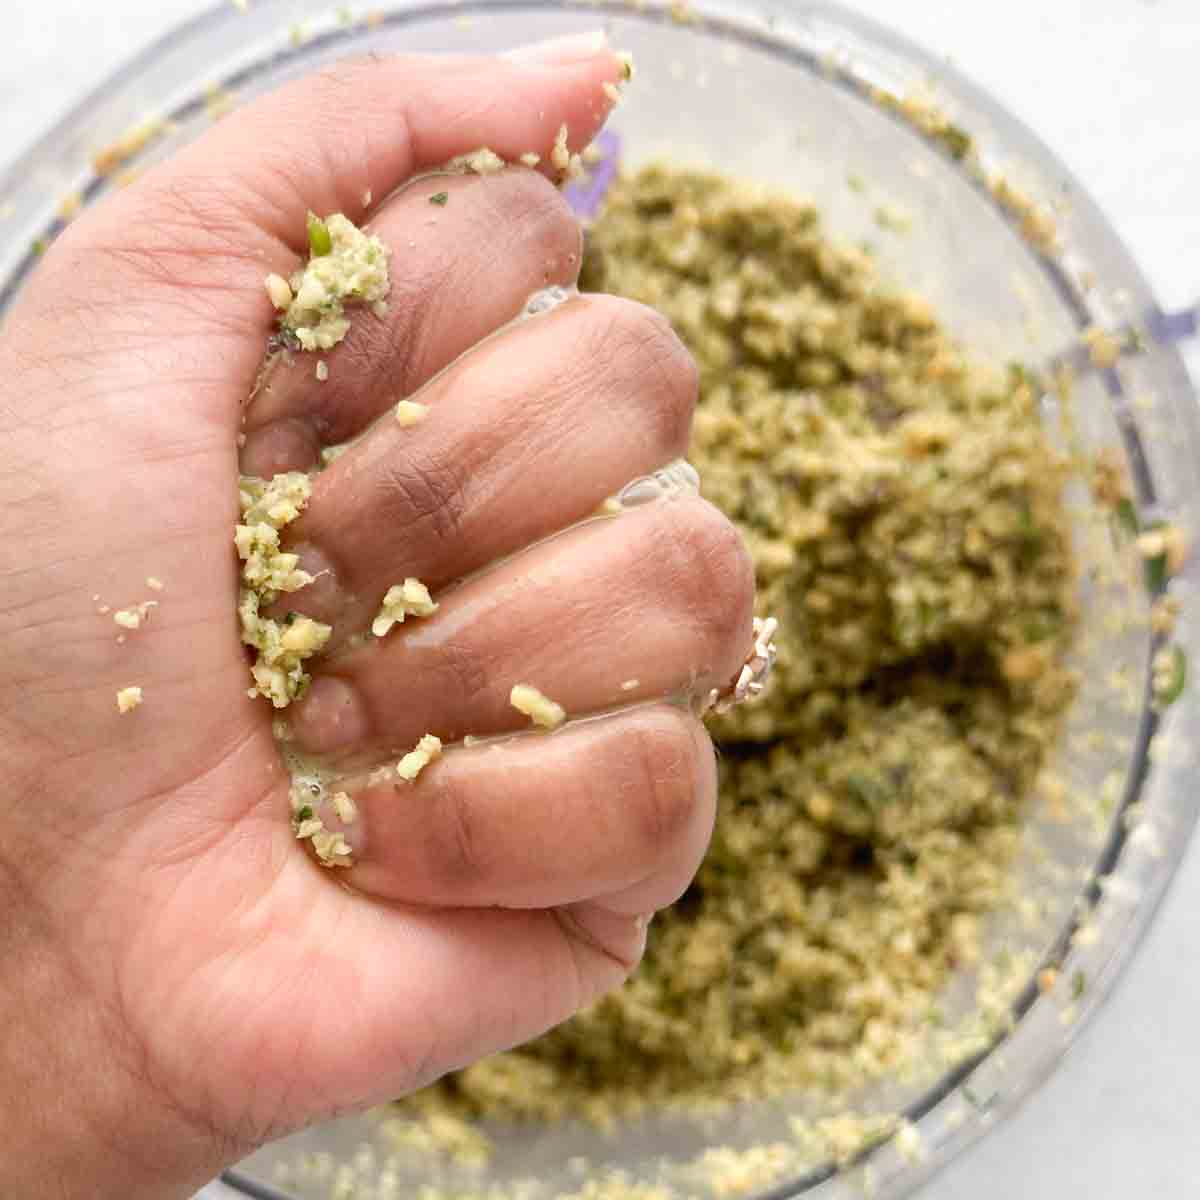 A hand squeezing masala vada mixture with more of the mixture in a food processor in the background.